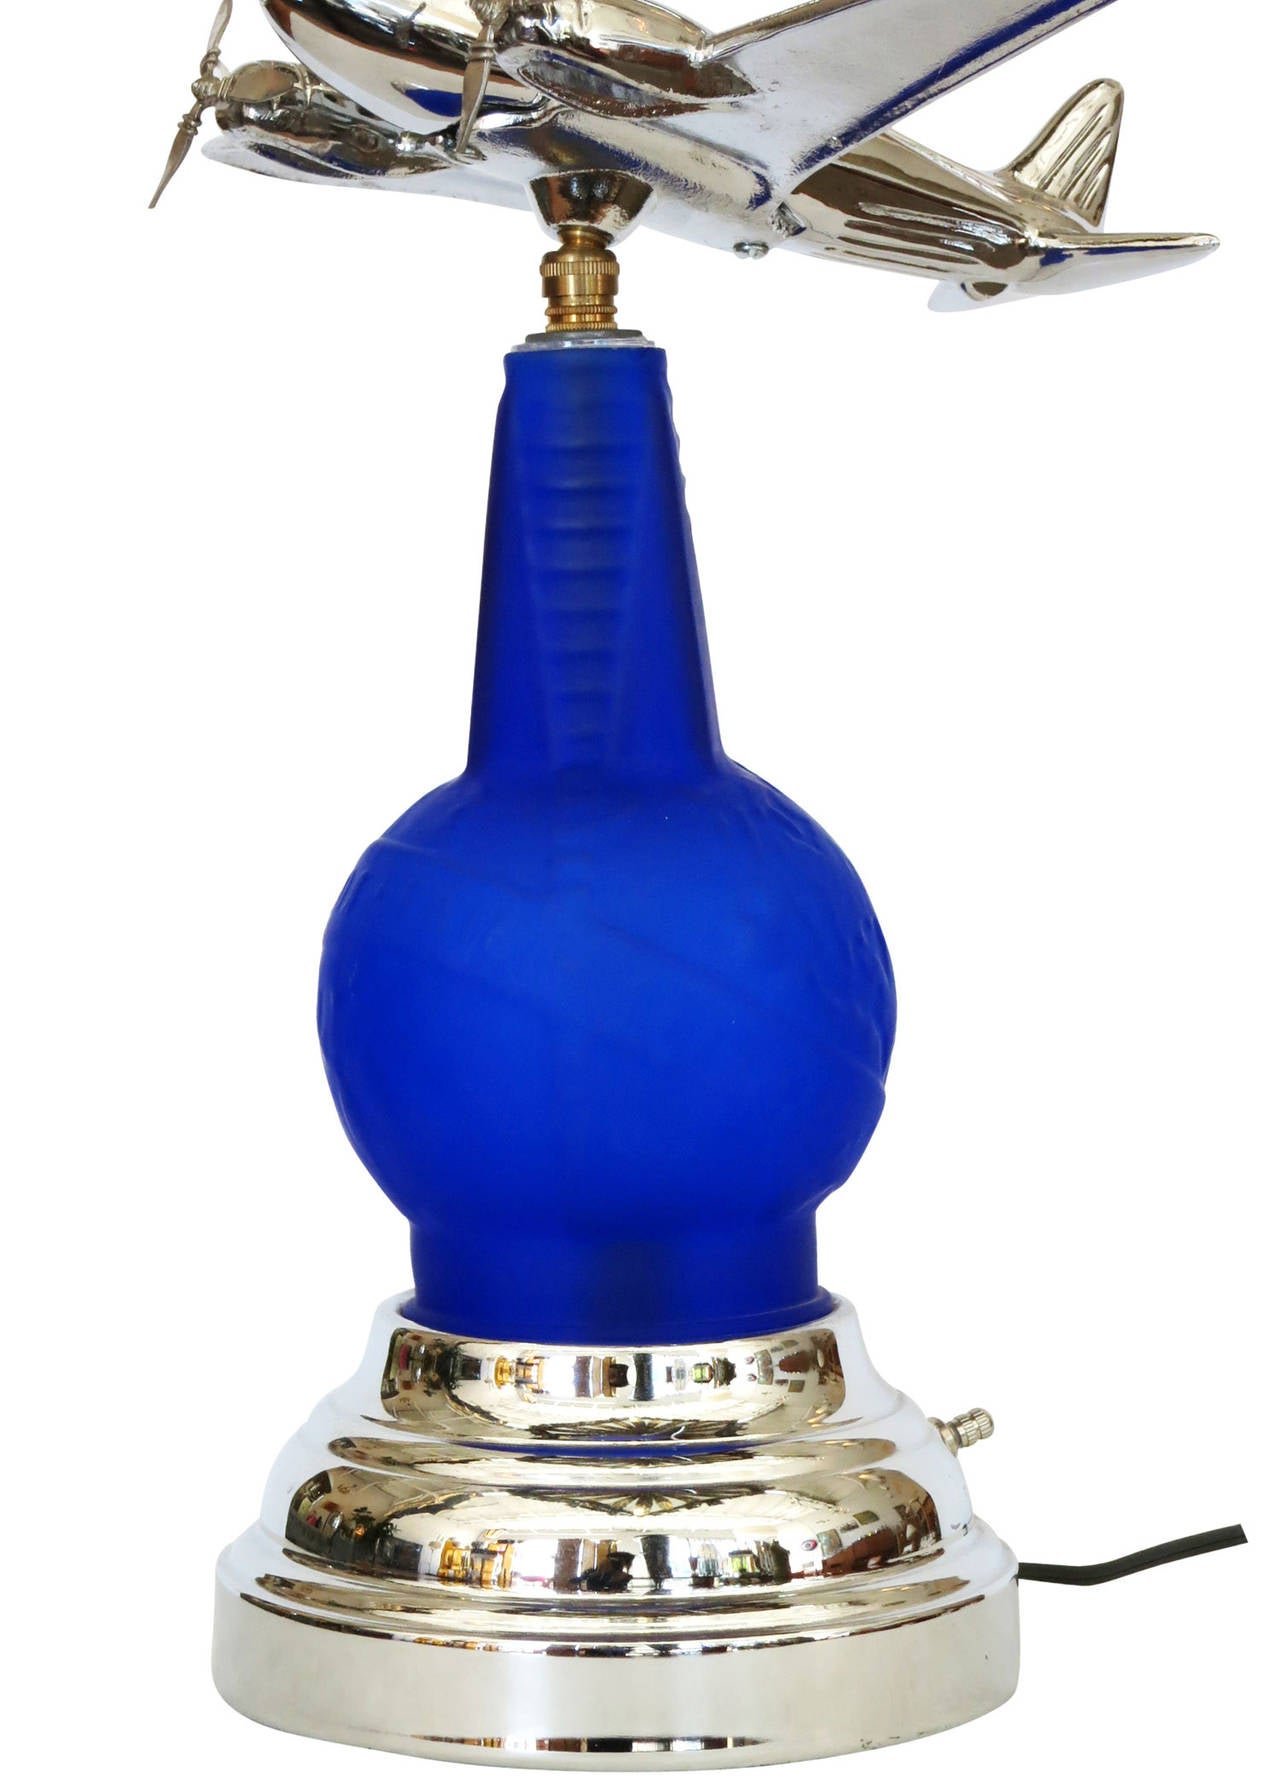 This custom chrome airplane accent lamp was created in Los Angeles in the 1980s using a re-edition 1939 cobalt blue World's Fair vinaigrette bottle. The 1939 vinaigrette bottle was re-purposed for the center of the design with an added chrome base